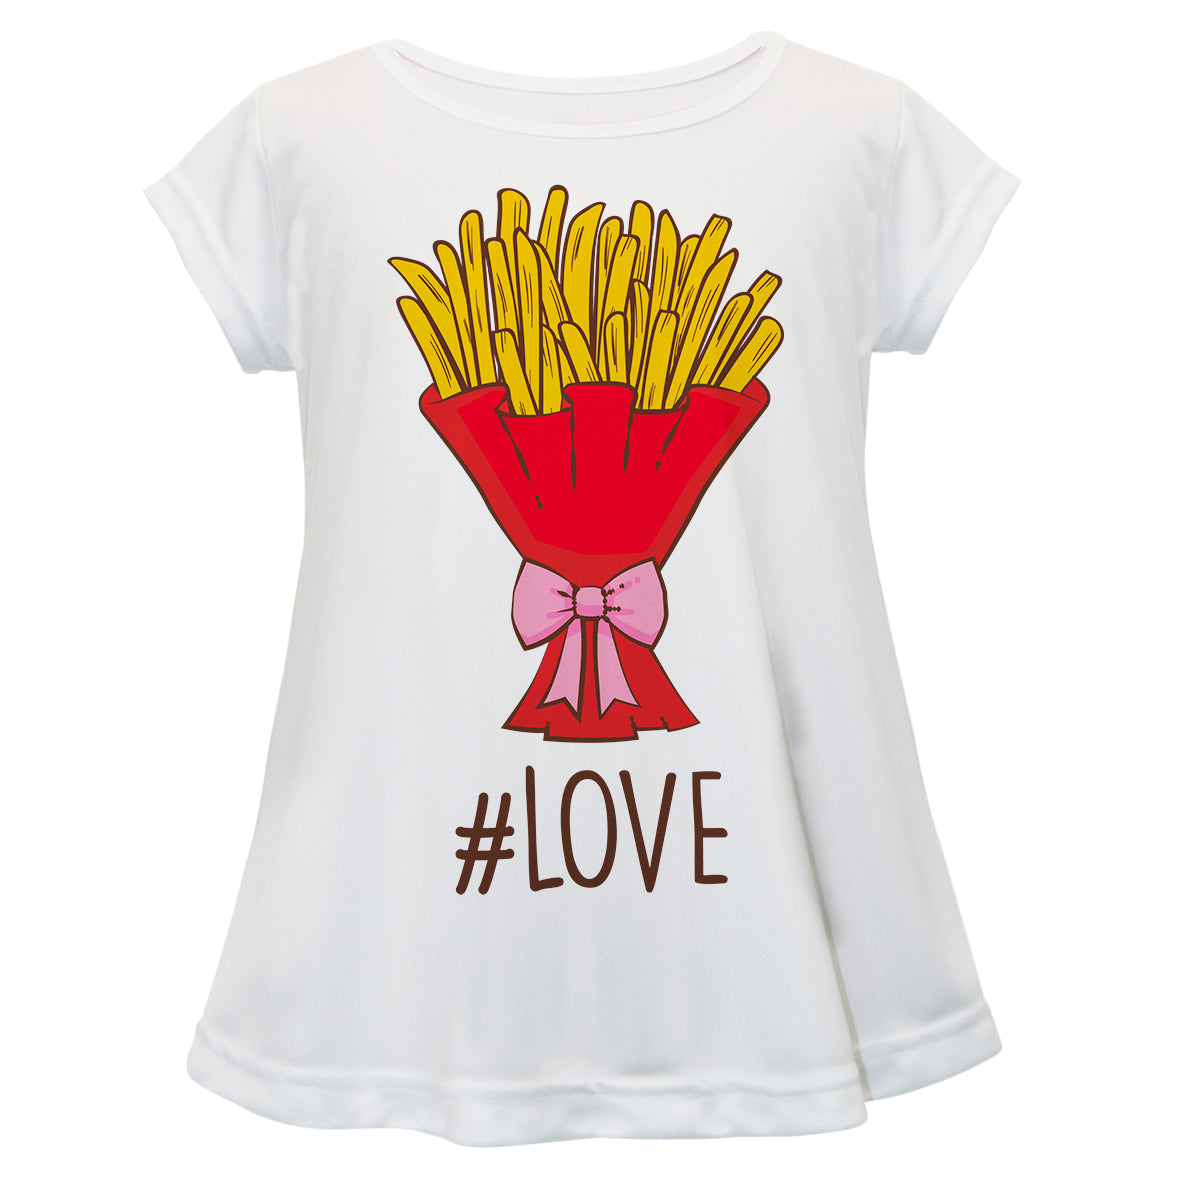 French Fries Love White Short Sleeve Laurie Top - Wimziy&Co.